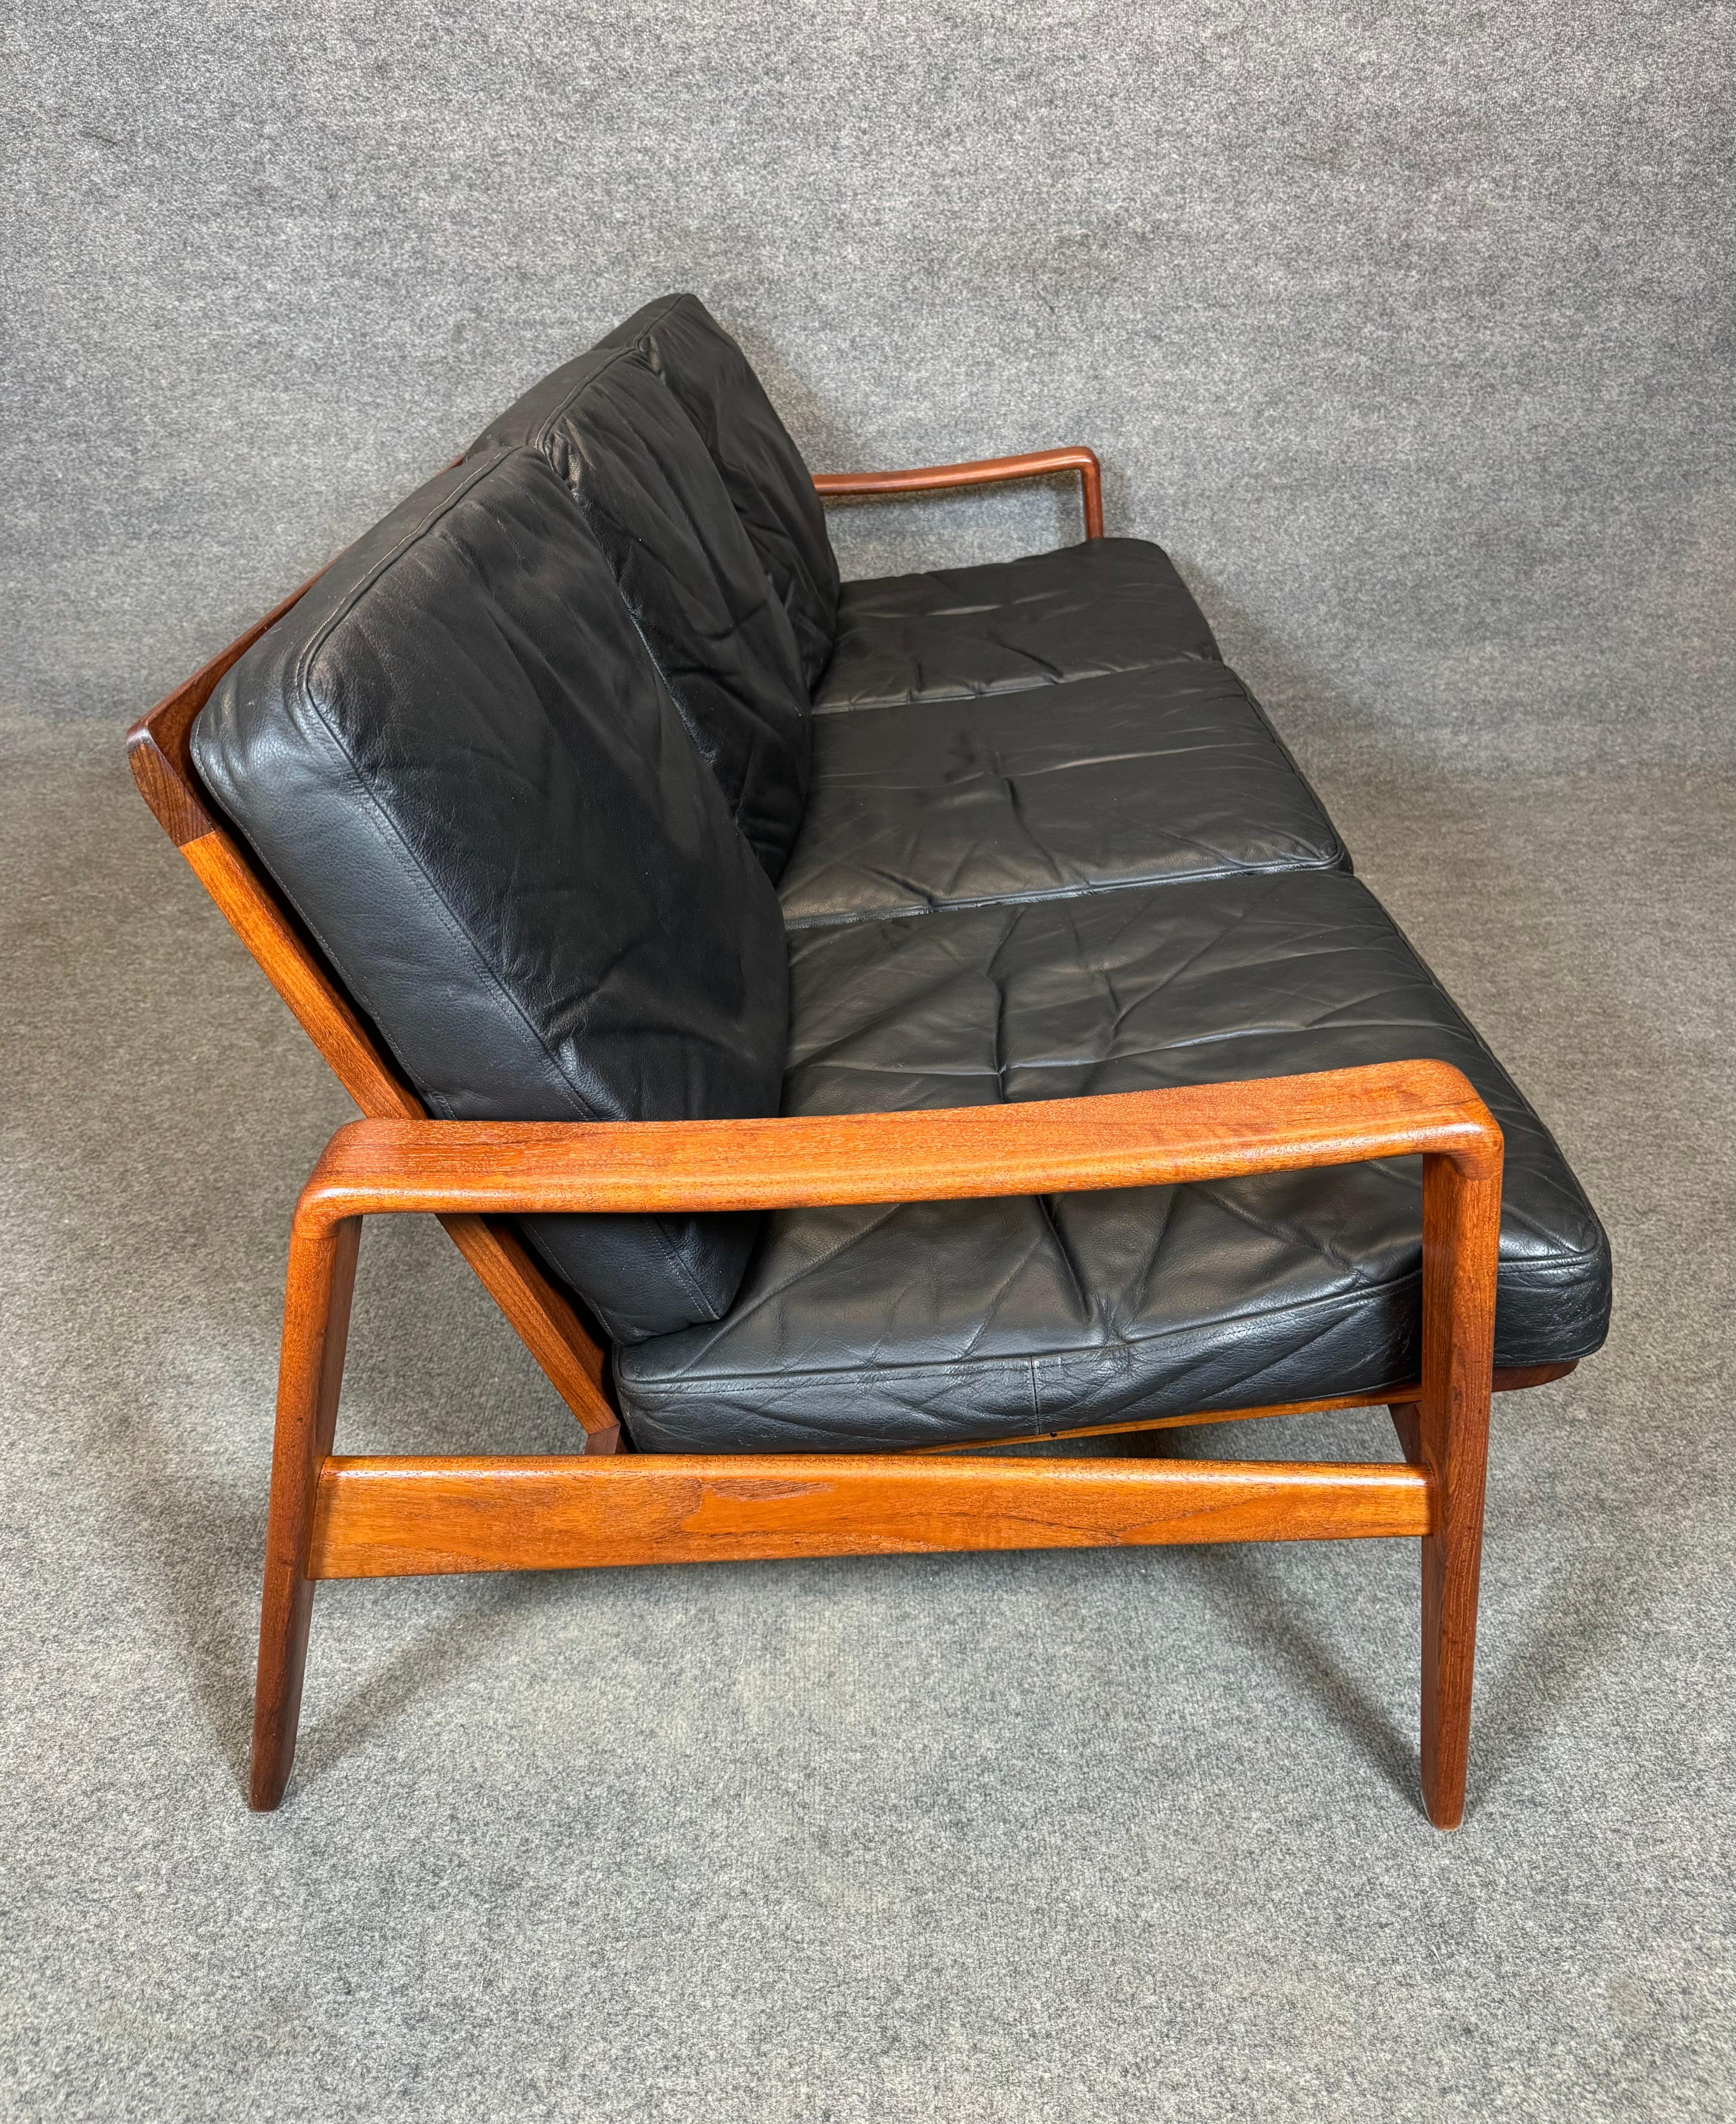 Here is a beautiful scandinavian modern sofa in teak designed by Arne Wahl Iversen and manufactured by Komfort in Norway in the 1960's.
This comfortable piece, recently imported rom Europe to California before its refinishing, features a sculptural